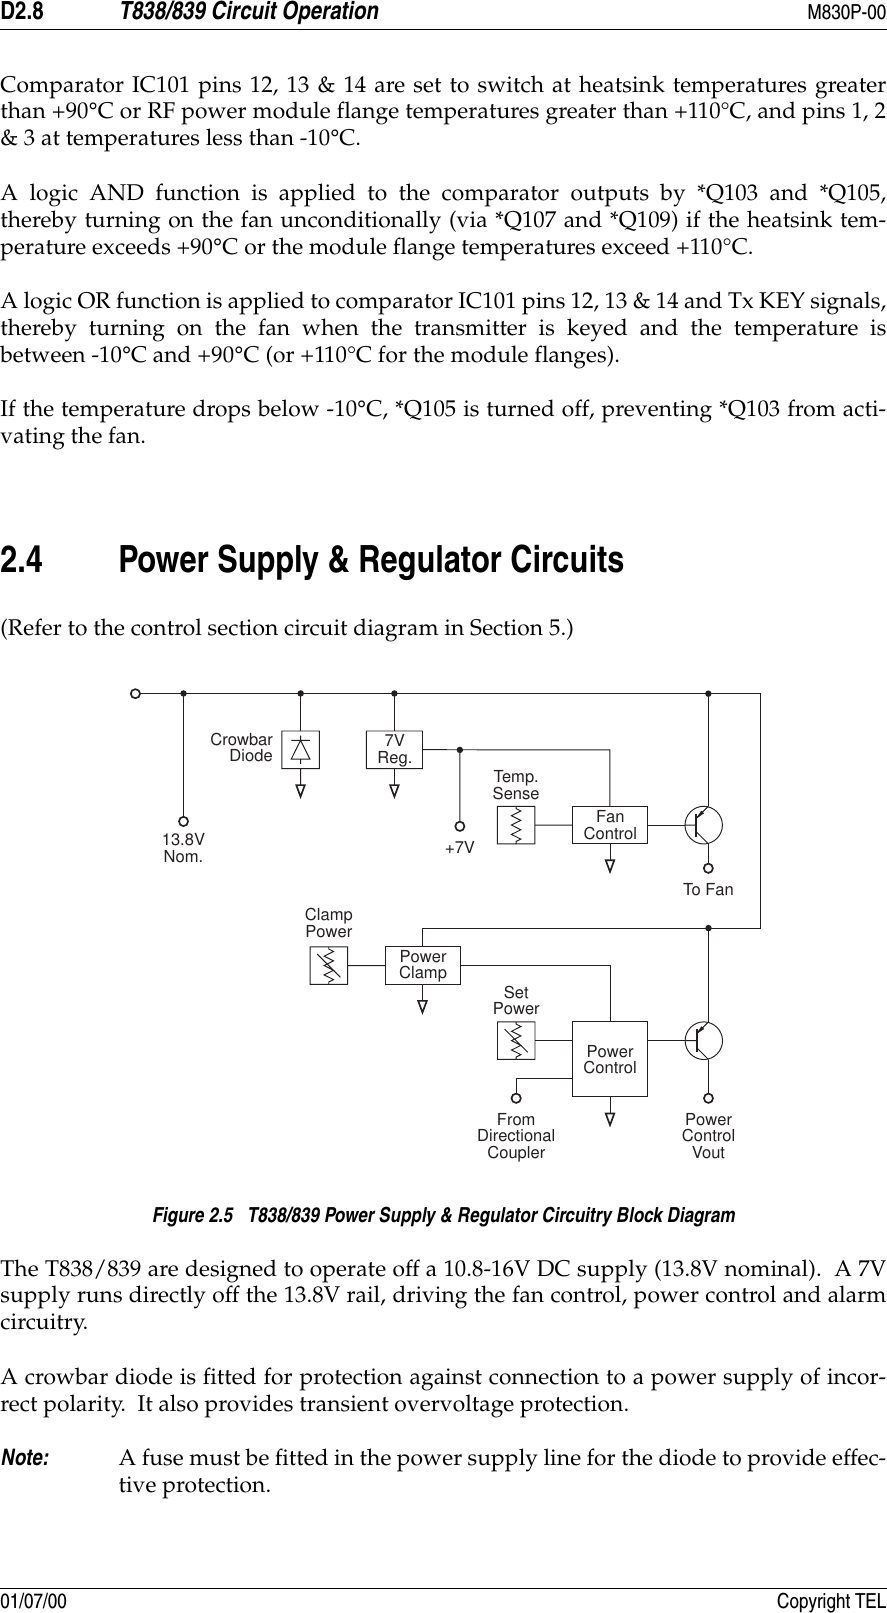 D2.8 T838/839 Circuit Operation M830P-0001/07/00 Copyright TELComparator IC101 pins 12, 13 &amp; 14 are set to switch at heatsink temperatures greaterthan +90°C or RF power module flange temperatures greater than +110°C, and pins 1, 2&amp; 3 at temperatures less than -10°C.A logic AND function is applied to the comparator outputs by *Q103 and *Q105,thereby turning on the fan unconditionally (via *Q107 and *Q109) if the heatsink tem-perature exceeds +90°C or the module flange temperatures exceed +110°C.A logic OR function is applied to comparator IC101 pins 12, 13 &amp; 14 and Tx KEY signals,thereby turning on the fan when the transmitter is keyed and the temperature isbetween -10°C and +90°C (or +110°C for the module flanges).If the temperature drops below -10°C, *Q105 is turned off, preventing *Q103 from acti-vating the fan.2.4 Power Supply &amp; Regulator Circuits(Refer to the control section circuit diagram in Section 5.)Figure 2.5   T838/839 Power Supply &amp; Regulator Circuitry Block DiagramThe T838/839 are designed to operate off a 10.8-16V DC supply (13.8V nominal).  A 7Vsupply runs directly off the 13.8V rail, driving the fan control, power control and alarmcircuitry.A crowbar diode is fitted for protection against connection to a power supply of incor-rect polarity.  It also provides transient overvoltage protection.Note: A fuse must be fitted in the power supply line for the diode to provide effec-tive protection.7VReg.FanControlPowerClampPowerControlCrowbarDiodeTemp.SenseTo Fan+7VClampPowerFromDirectionalCouplerPowerControlVoutSetPower13.8VNom.